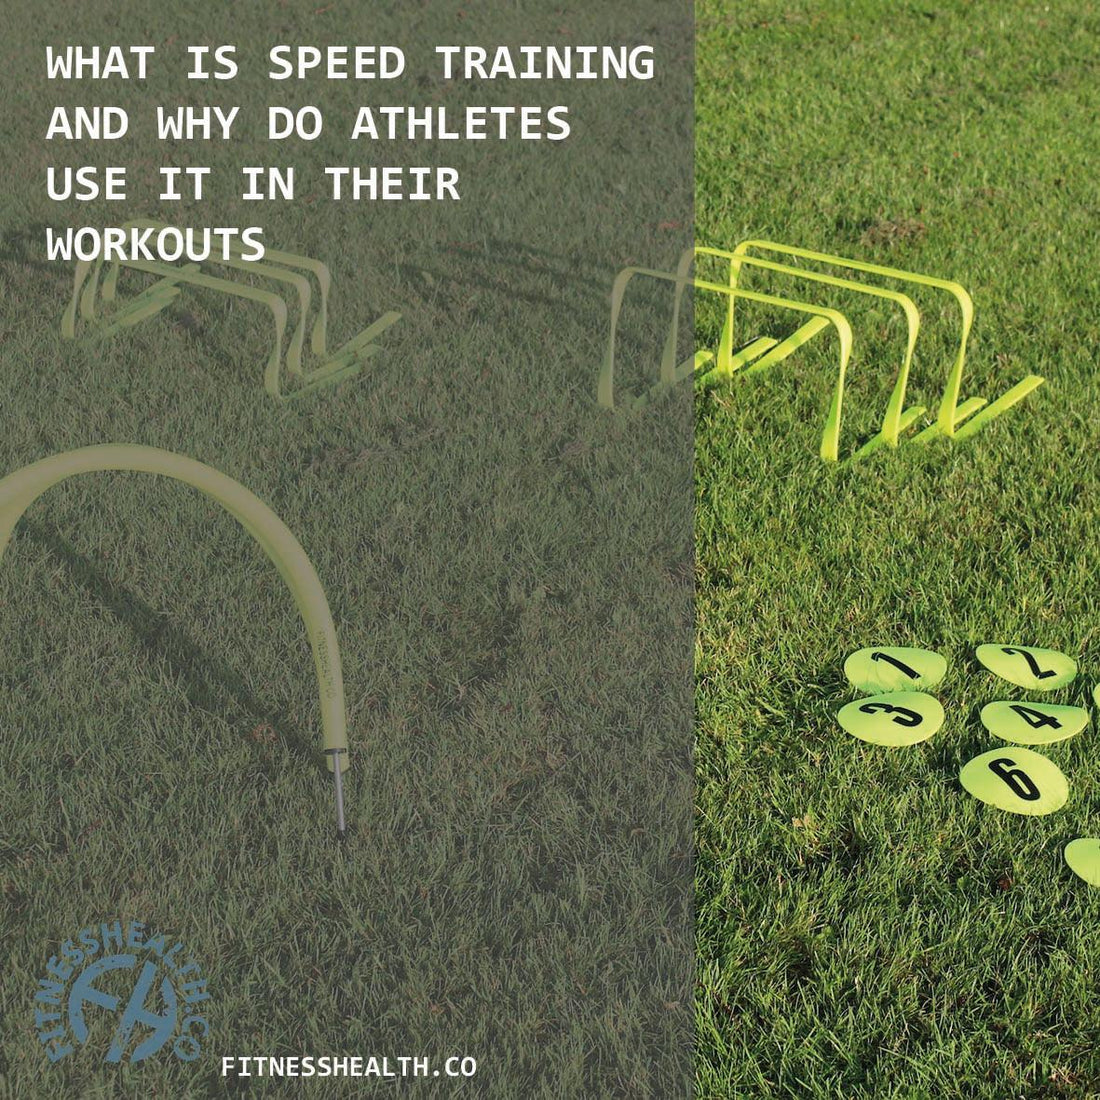 WHAT IS SPEED TRAINING AND WHY DO ATHLETES USE IT IN THEIR WORKOUTS - Fitness Health 